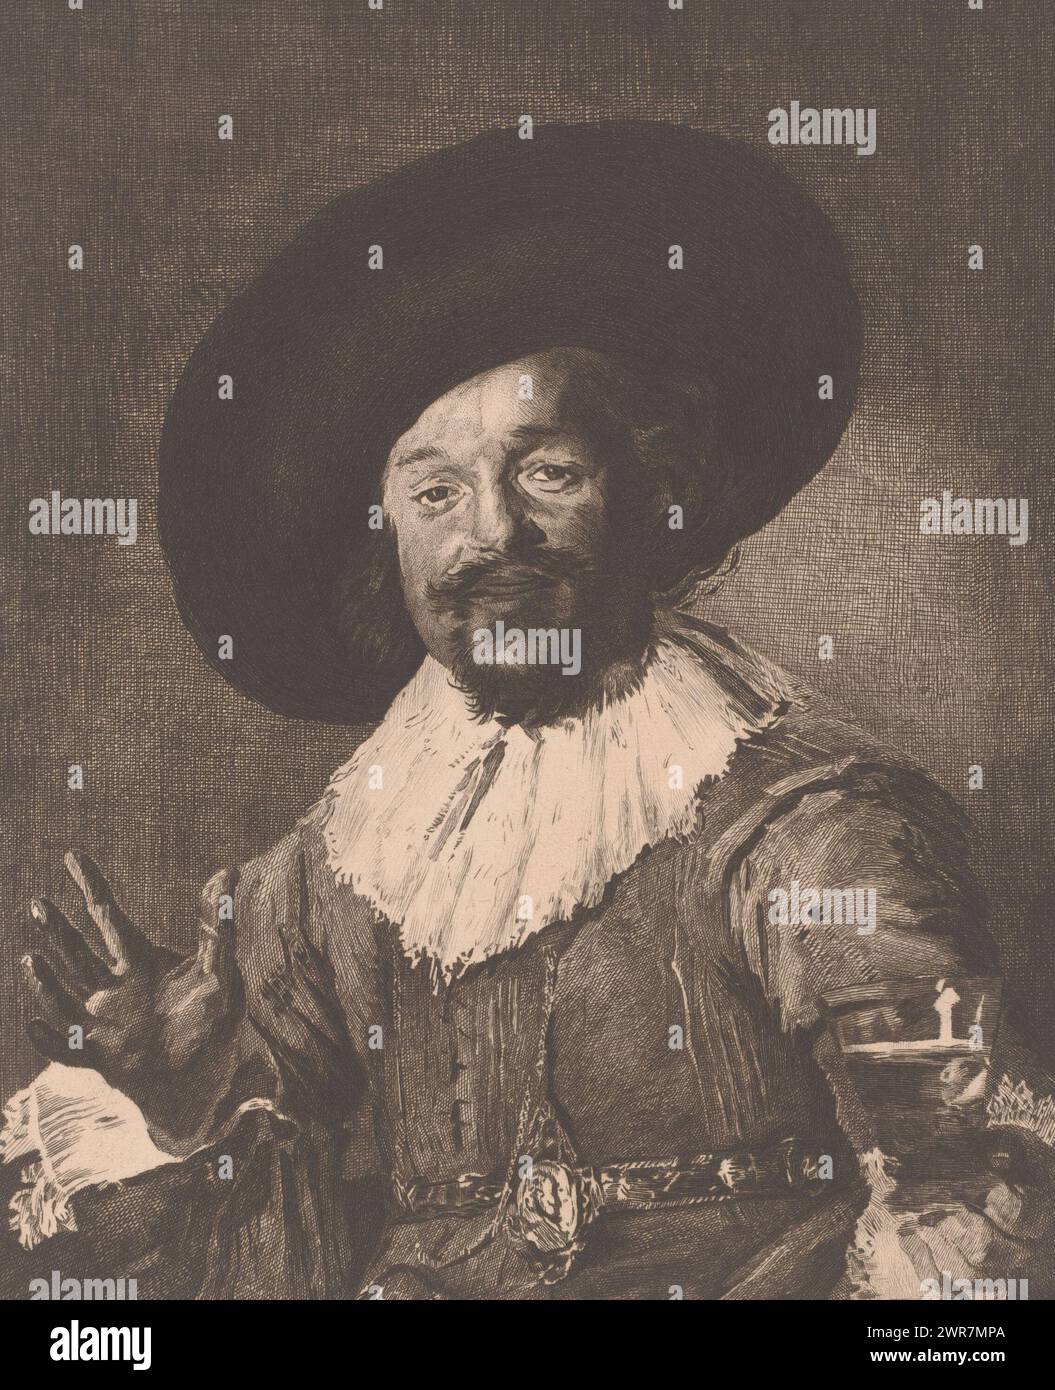 Man with hat and drinking glass, The cheerful drinker, print maker: Charles Théodore Bernier, (signed by artist), after painting by: Frans Hals, 1888, paper, etching, height 298 mm × width 240 mm, print Stock Photo